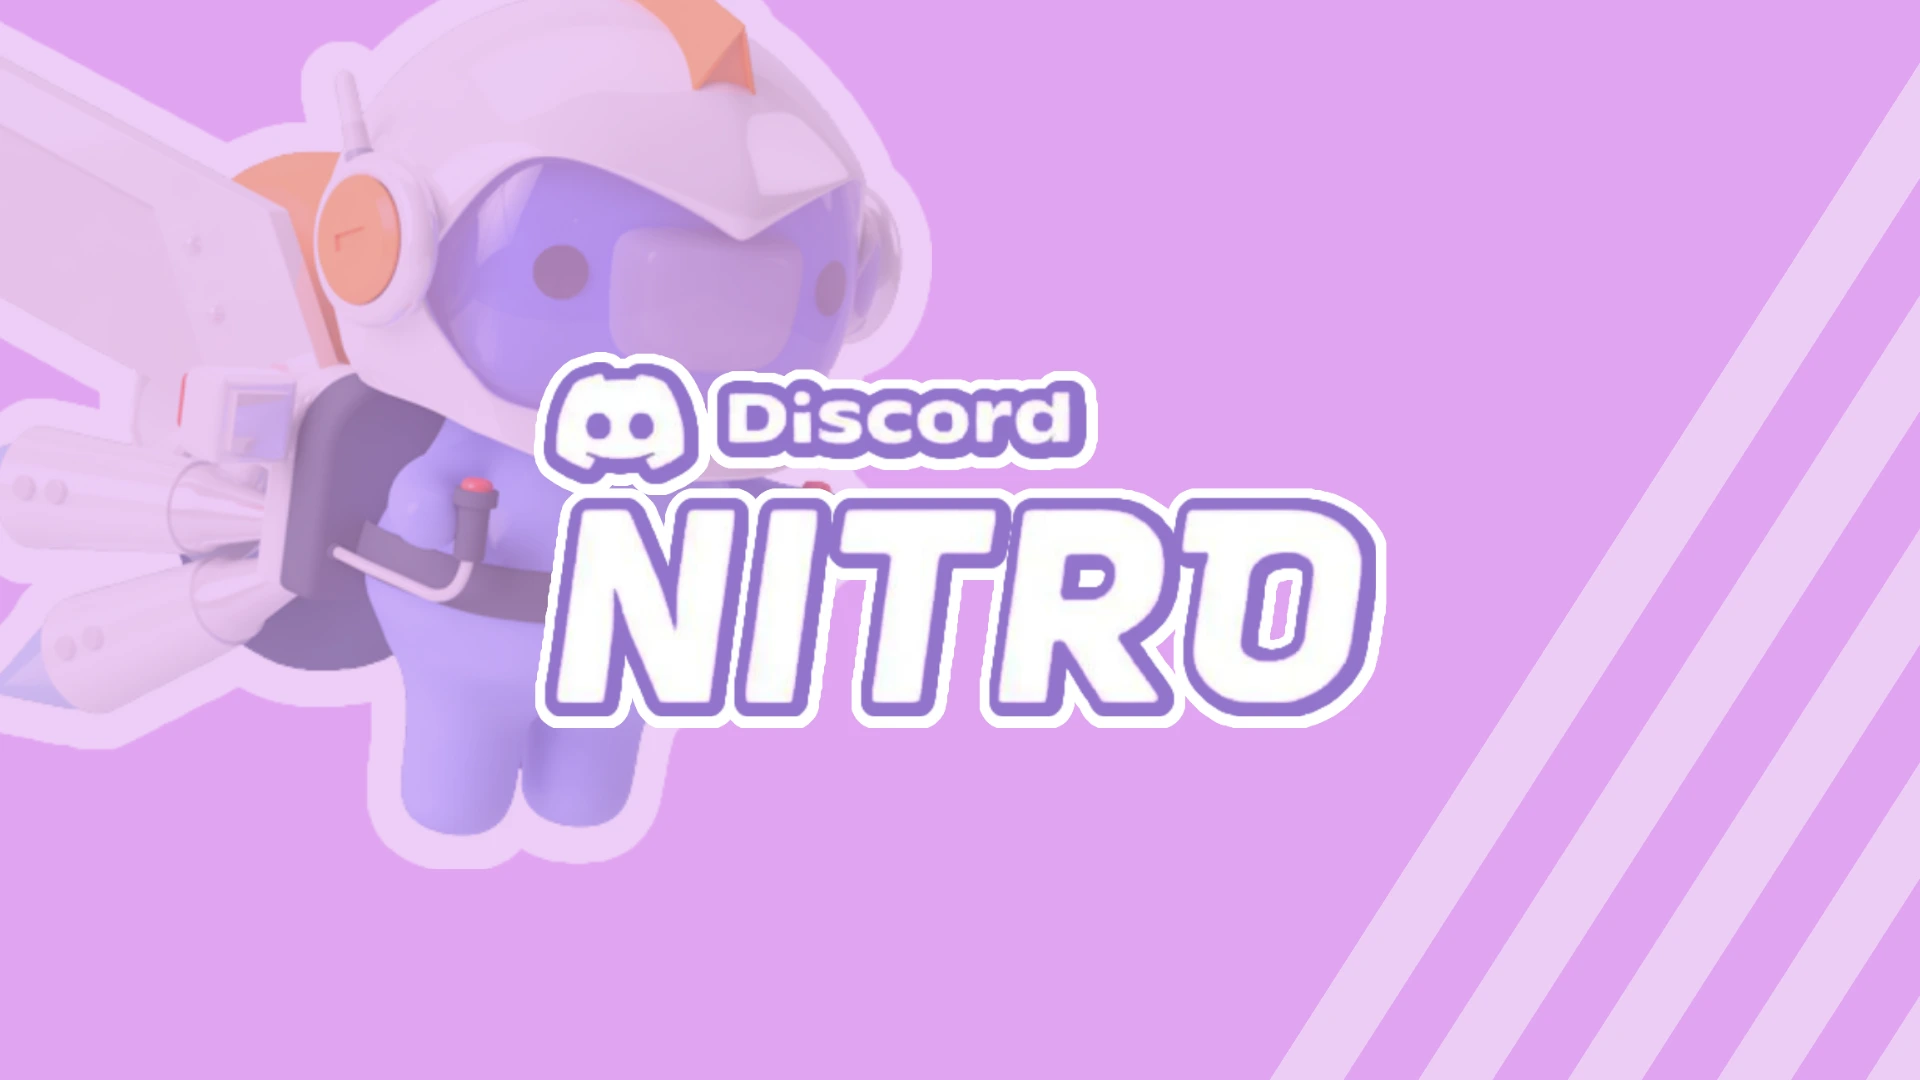 Crunchyroll and Discord Offer 1-Month Free Discord Nitro Trial to